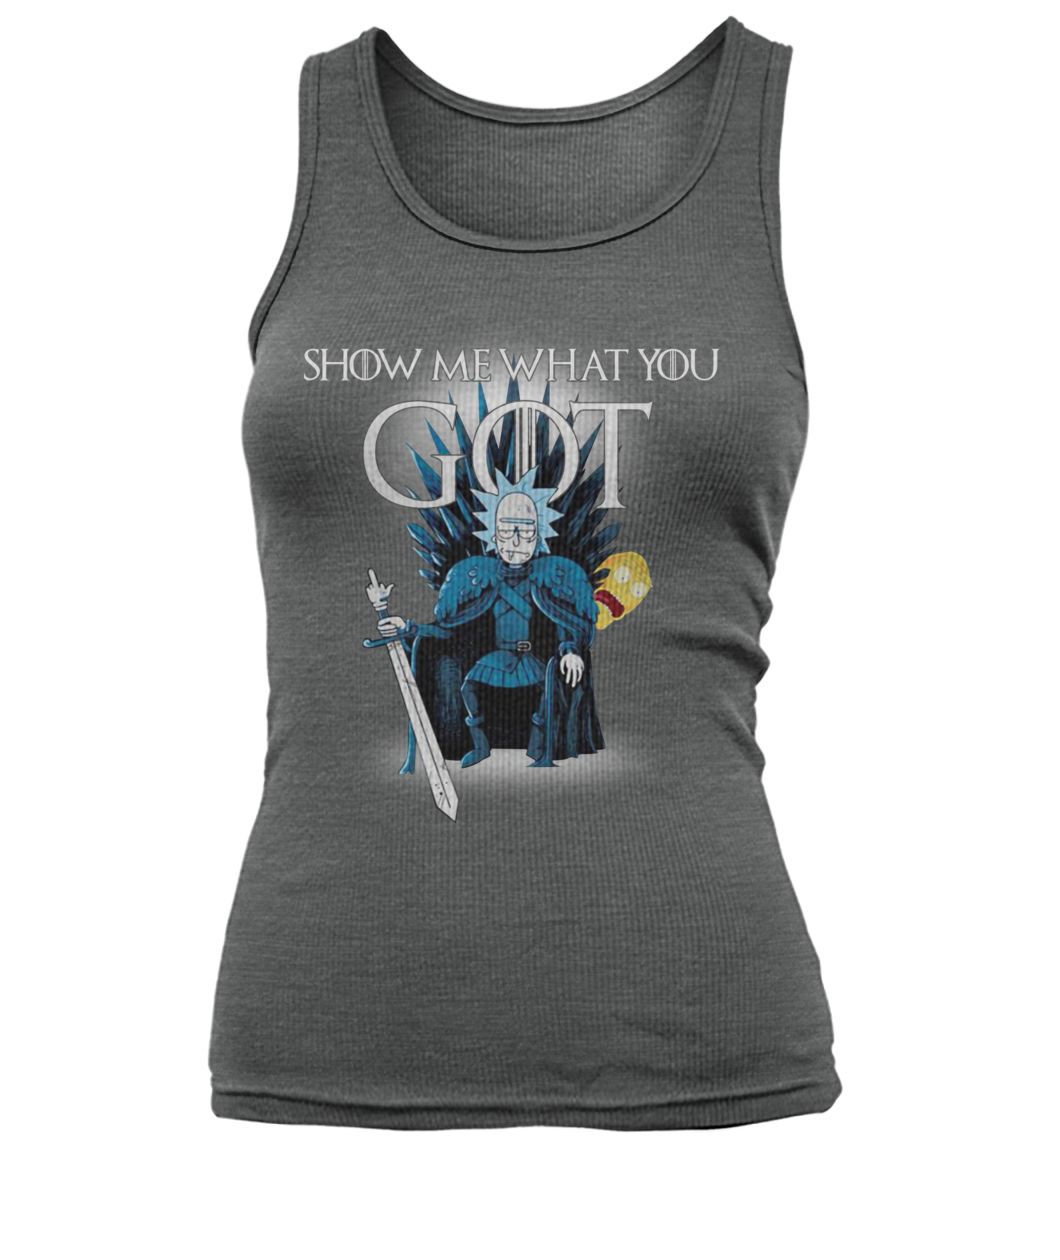 Game of thrones rick and morty show me what you got women's tank top